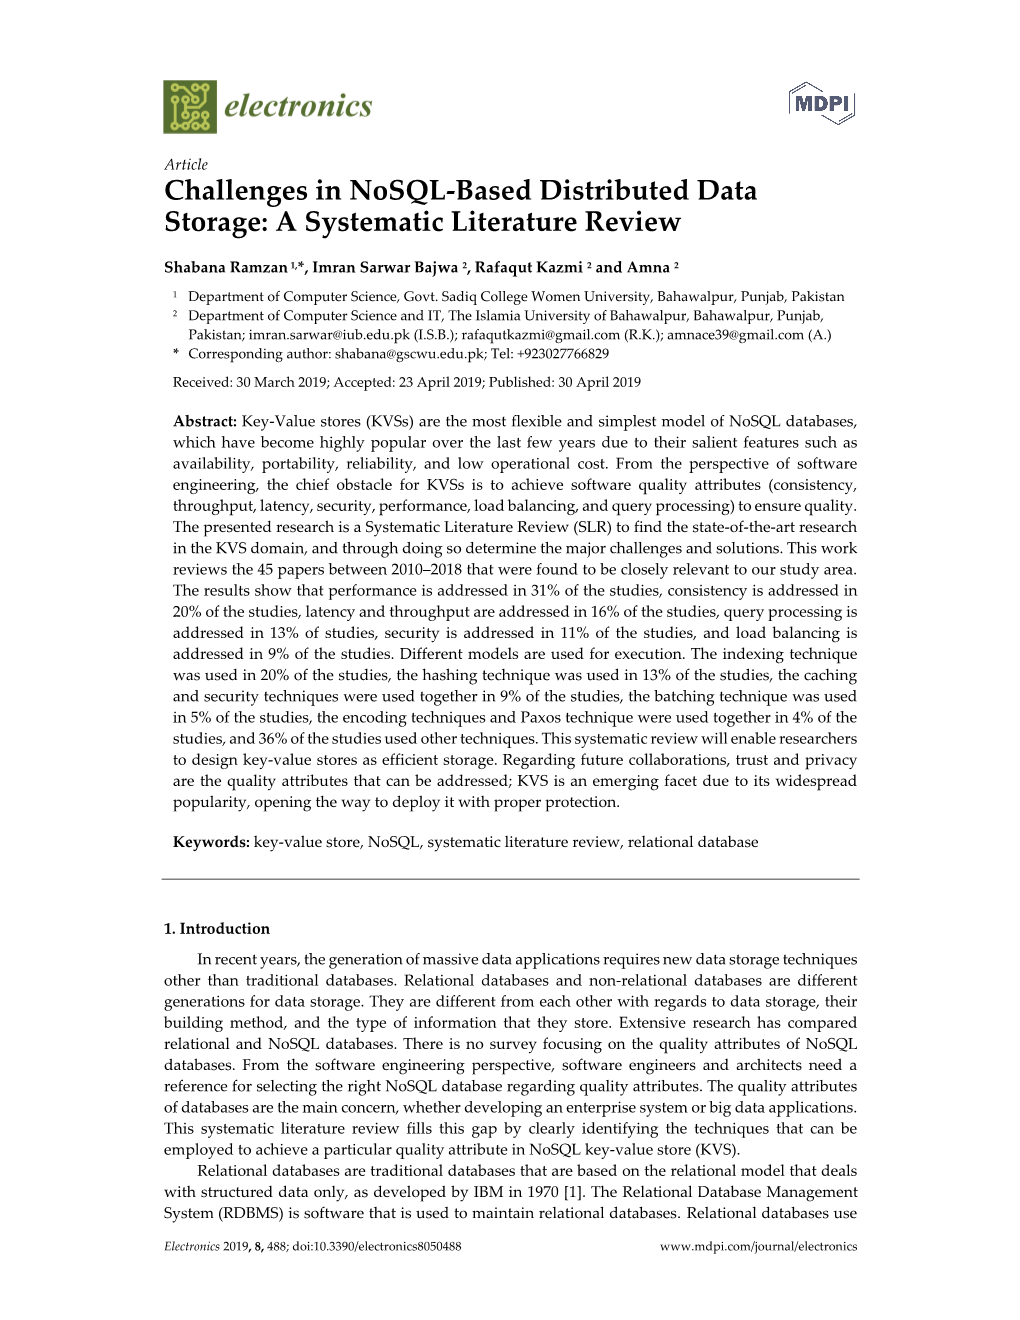 Challenges in Nosql-Based Distributed Data Storage: a Systematic Literature Review